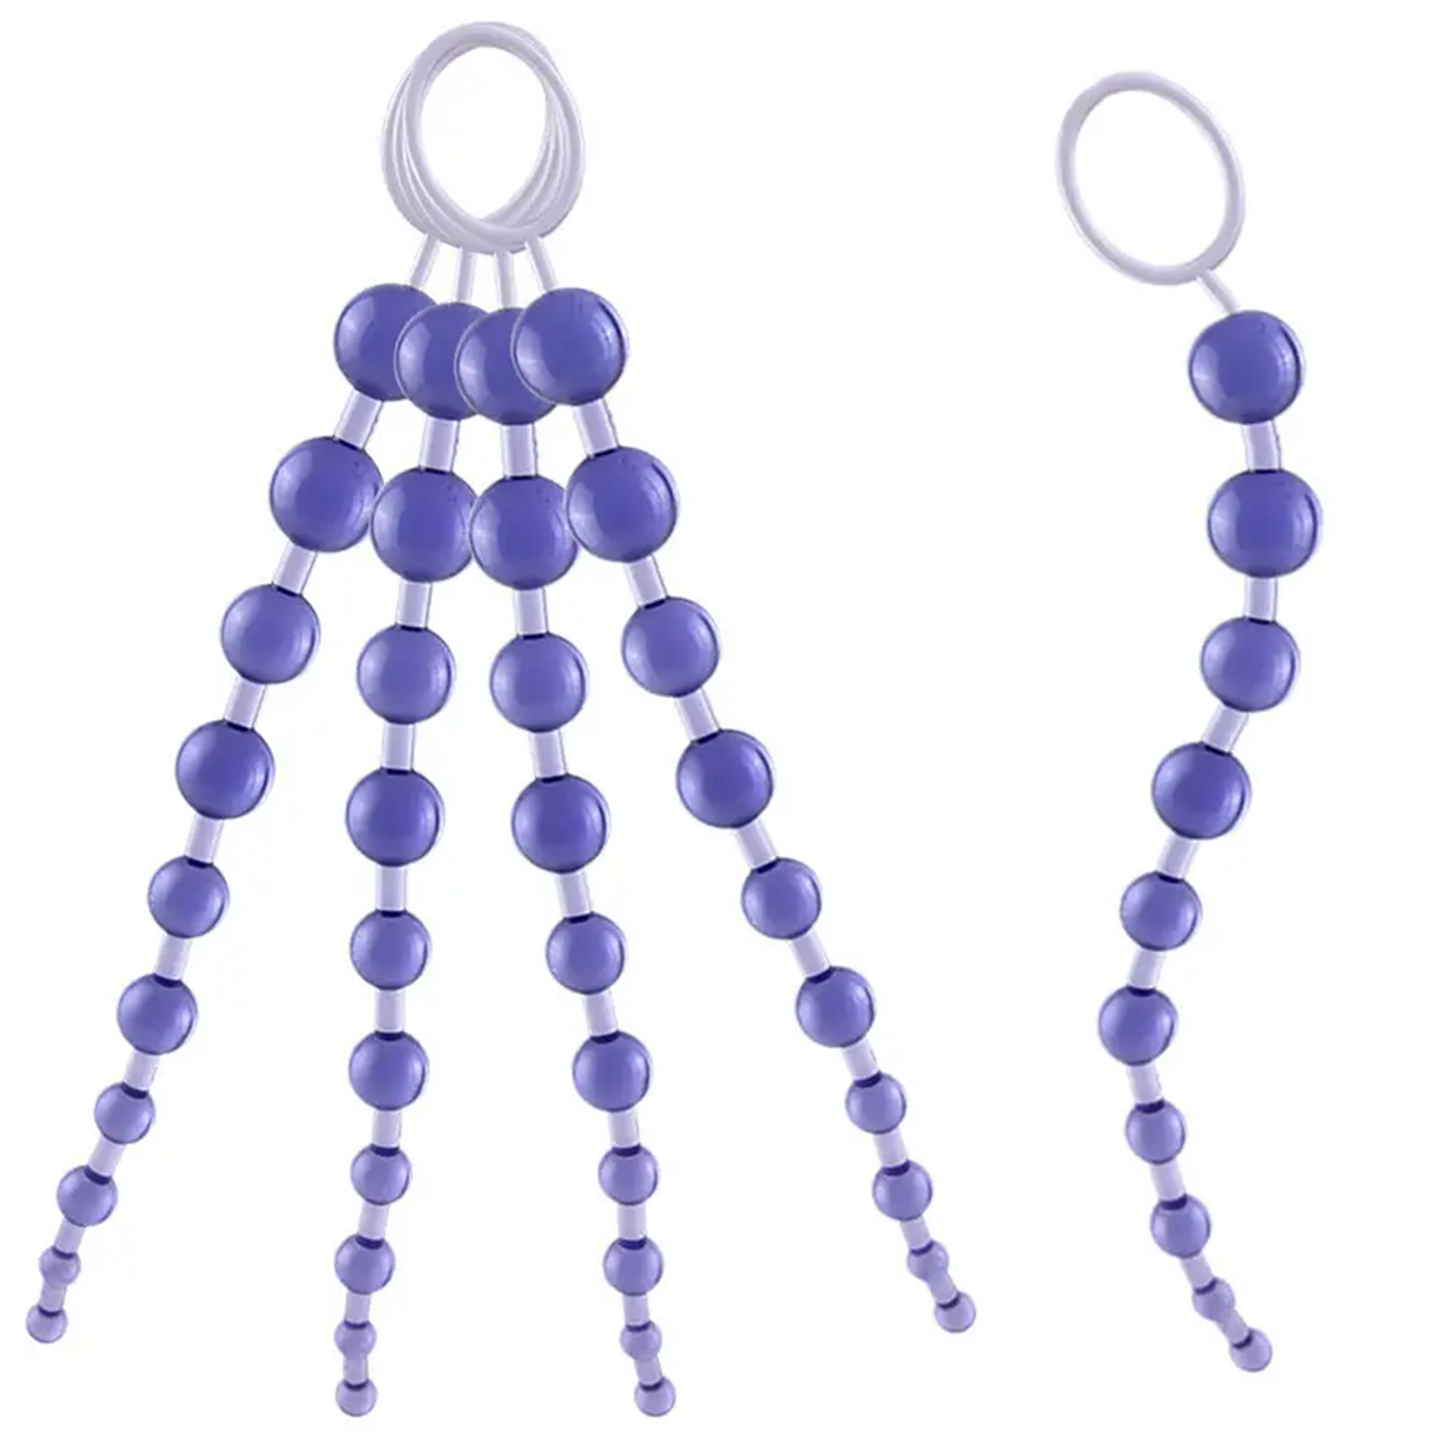 Youngwill Jelly Anal Beads Pull Ring Ball Anal plugYoungwill 12.5'' Anal Beads Anal Ball Butt plug